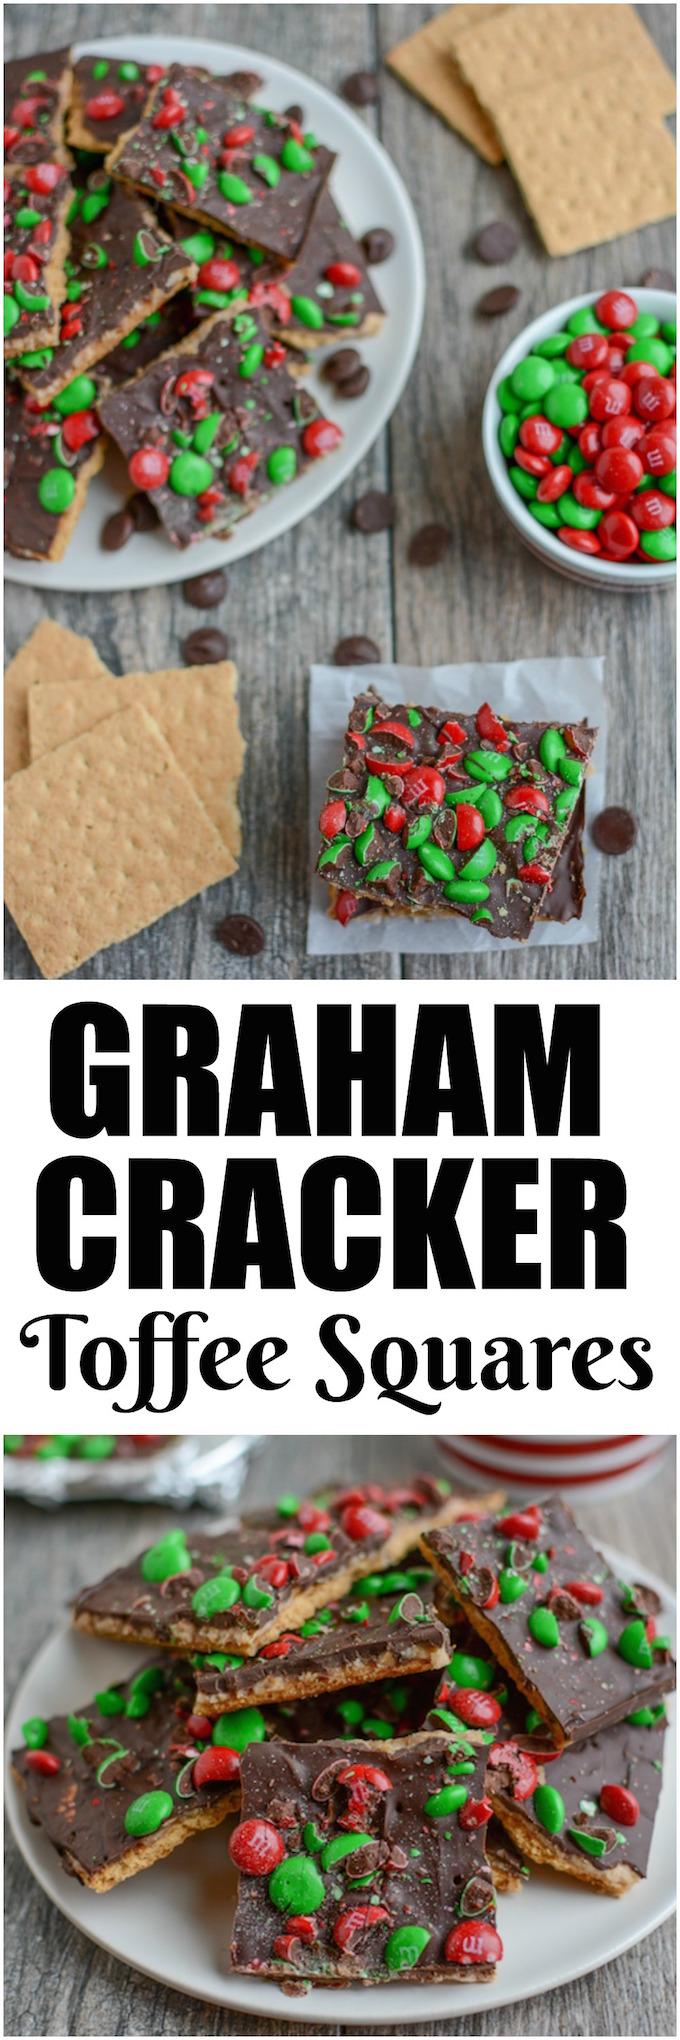 This Graham Cracker Toffee Bars recipe is a Christmas cookie tray staple! Everyone will love this classic dessert and it's the perfect quick, easy holiday treat!